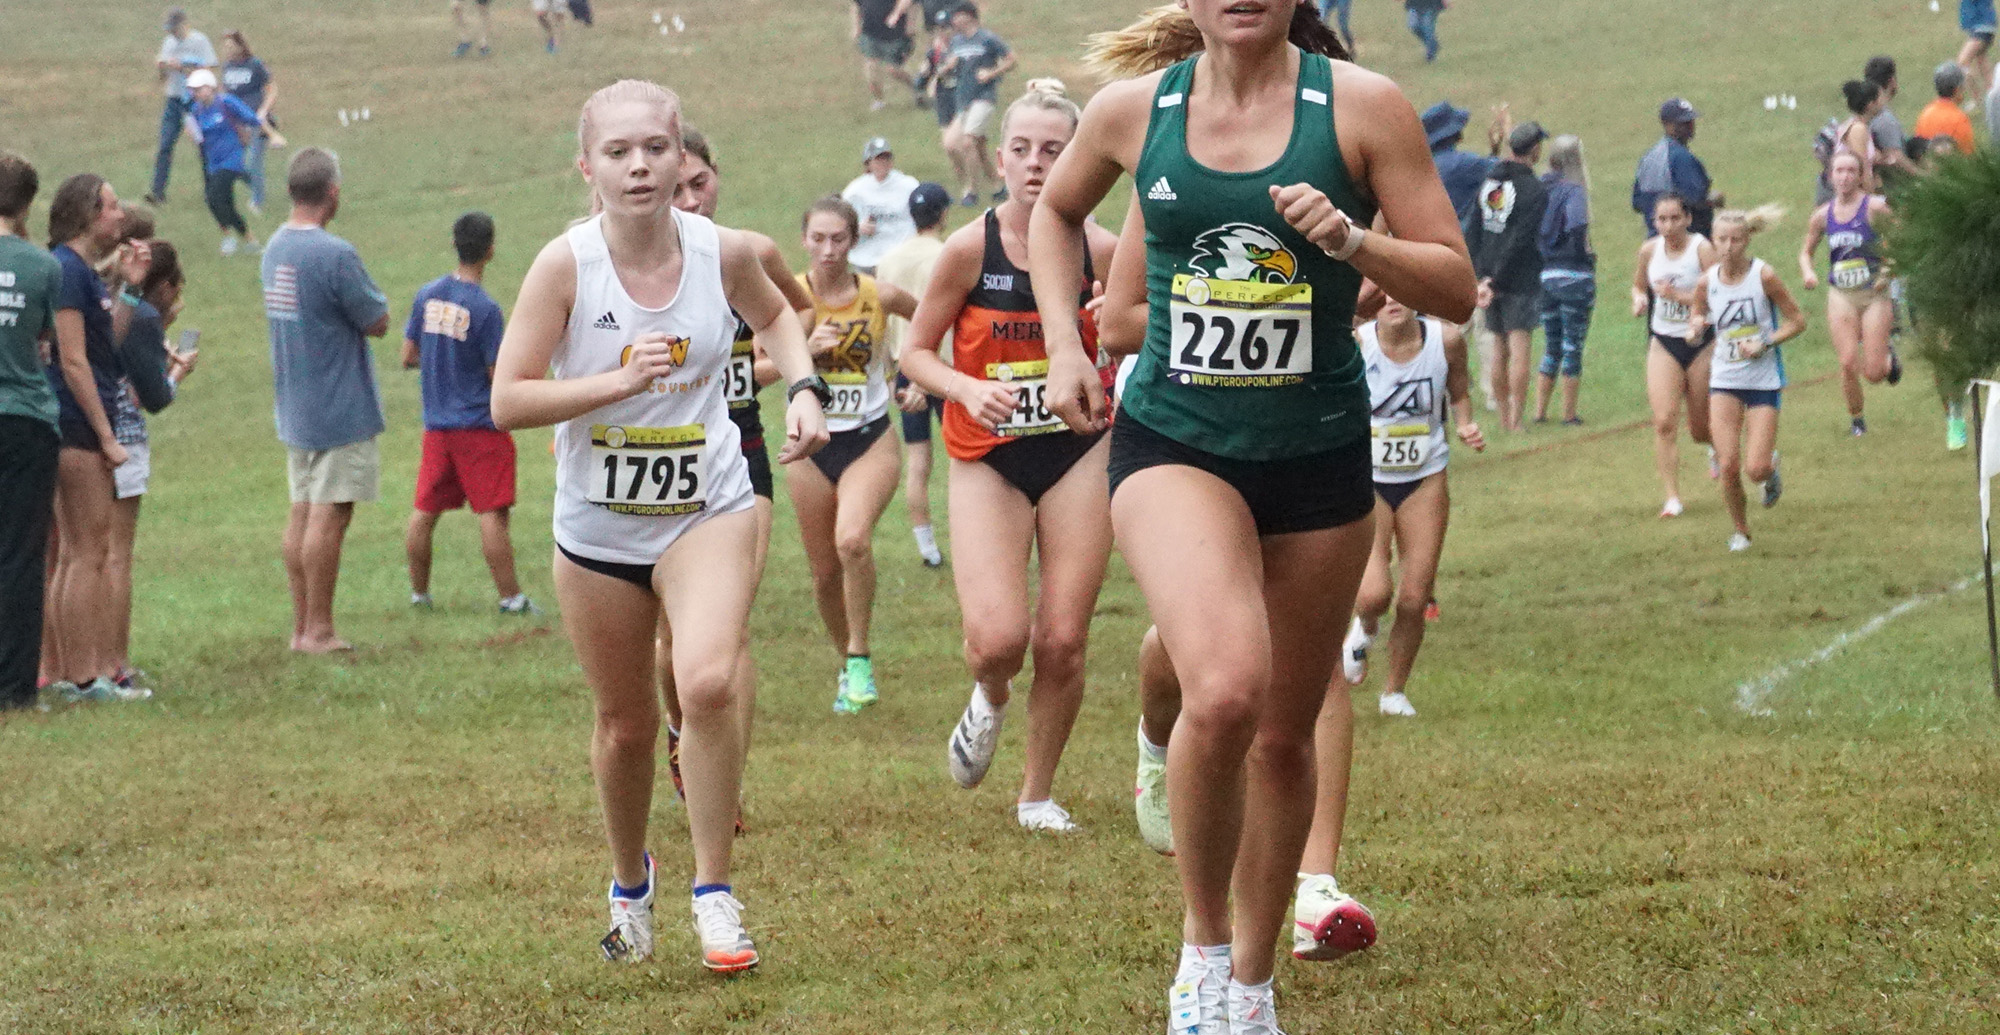 8 NCAA Division I Programs Featured at ASICS Cross Country Invitational